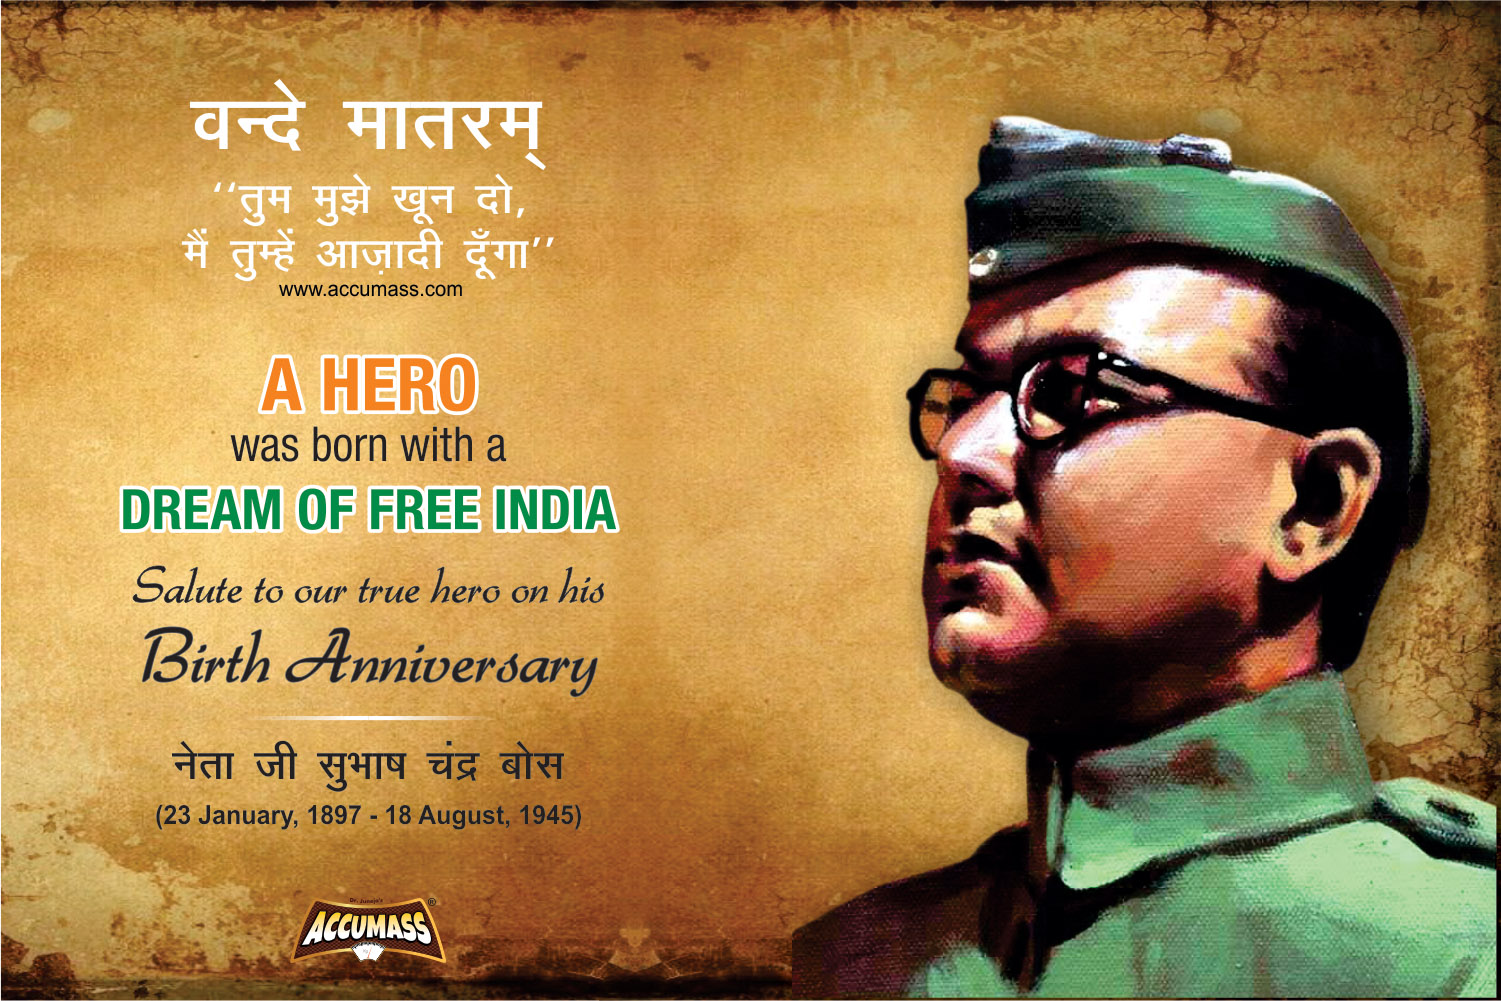 23 January 2018, Netaji Subhash Chandra Bose's Birth Anniversary, Special Day In this January 2018, Special January Month, Todays Special, What Happened In January, Whats Special In This Month, Freedom